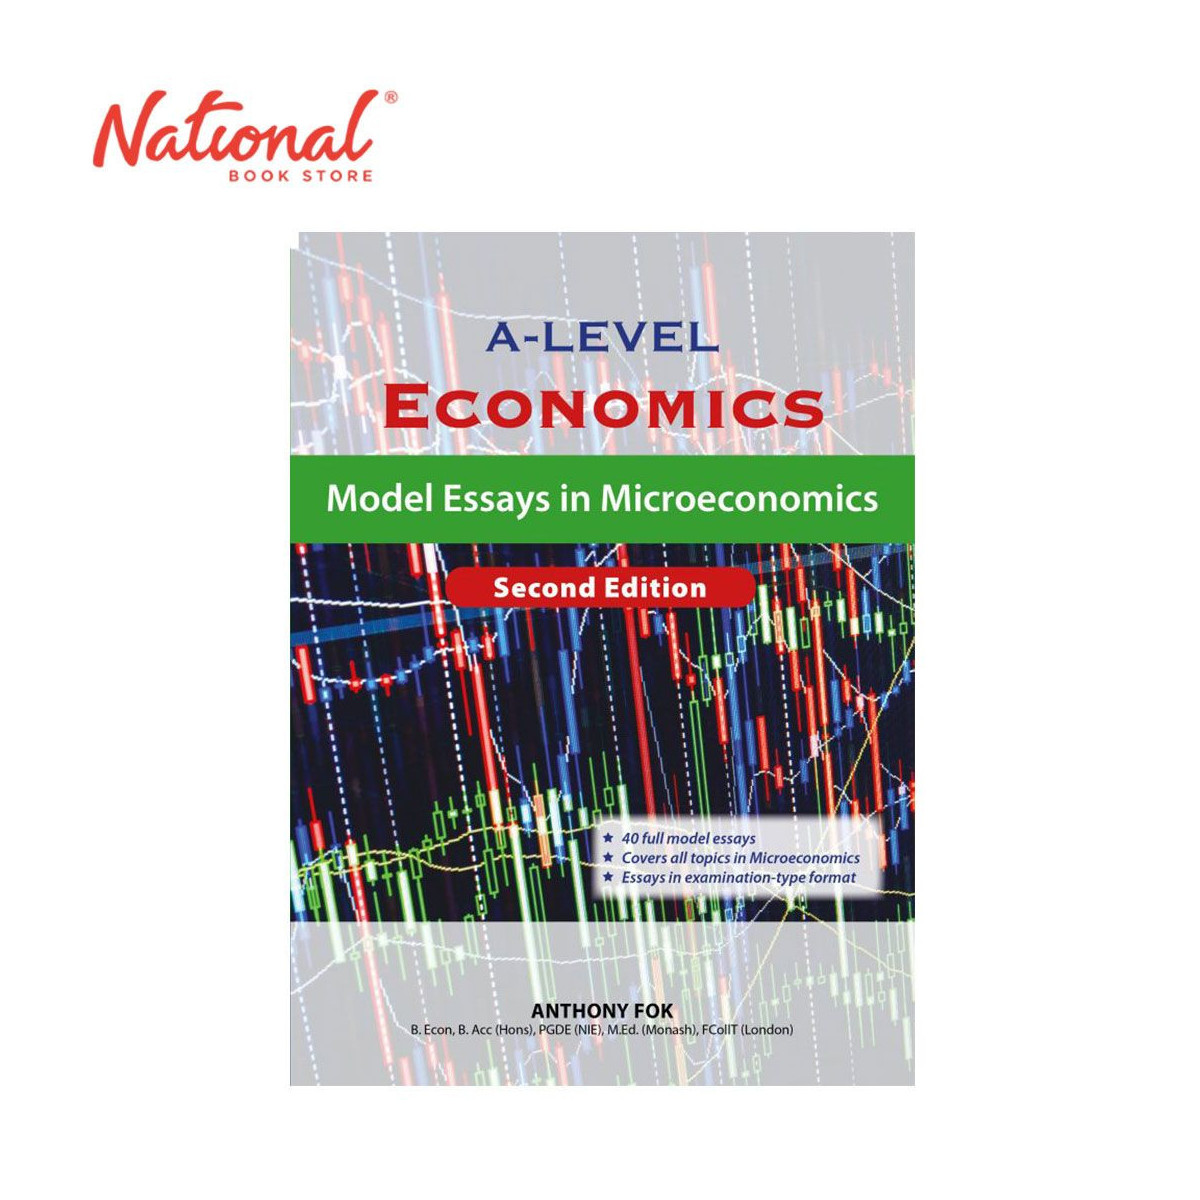 *SPECIAL ORDER* A-Level Economics: Model Essays in Microeconomics by Anthony Fok - Trade Paperback - School Books